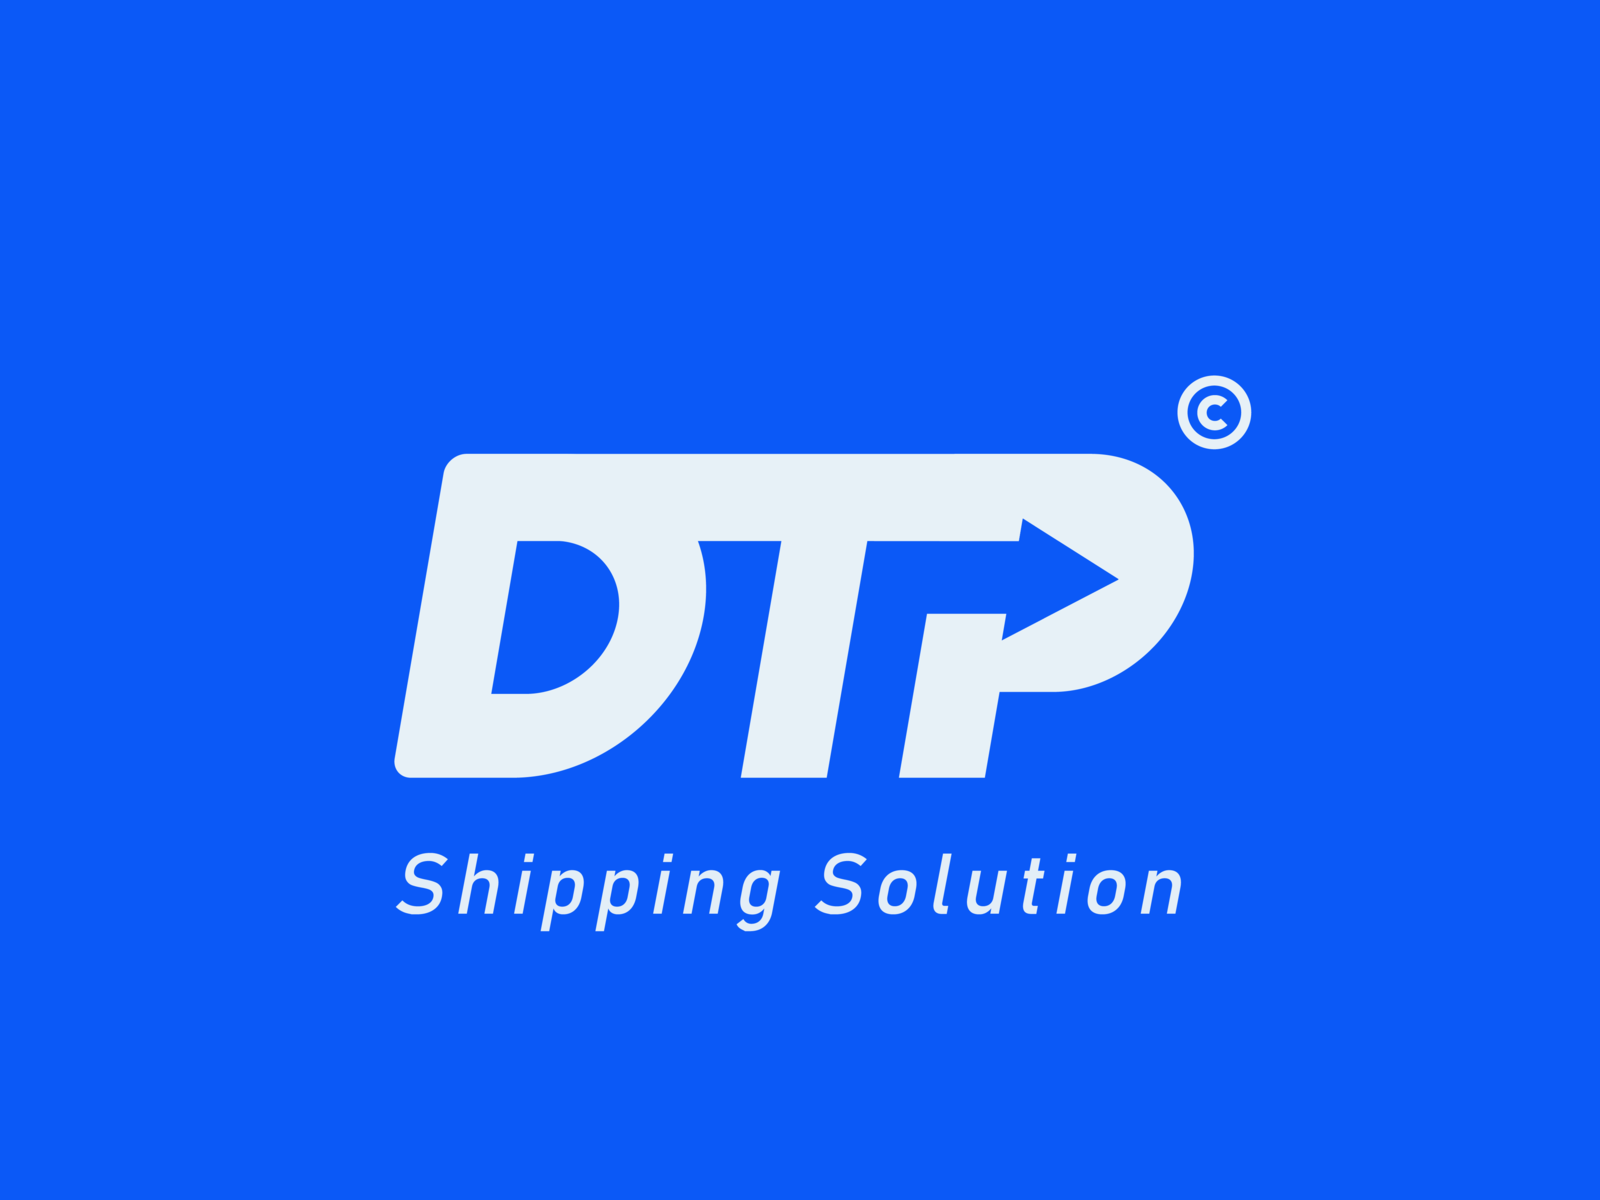 dtp-shipping-solution-by-haidar-alwi-on-dribbble